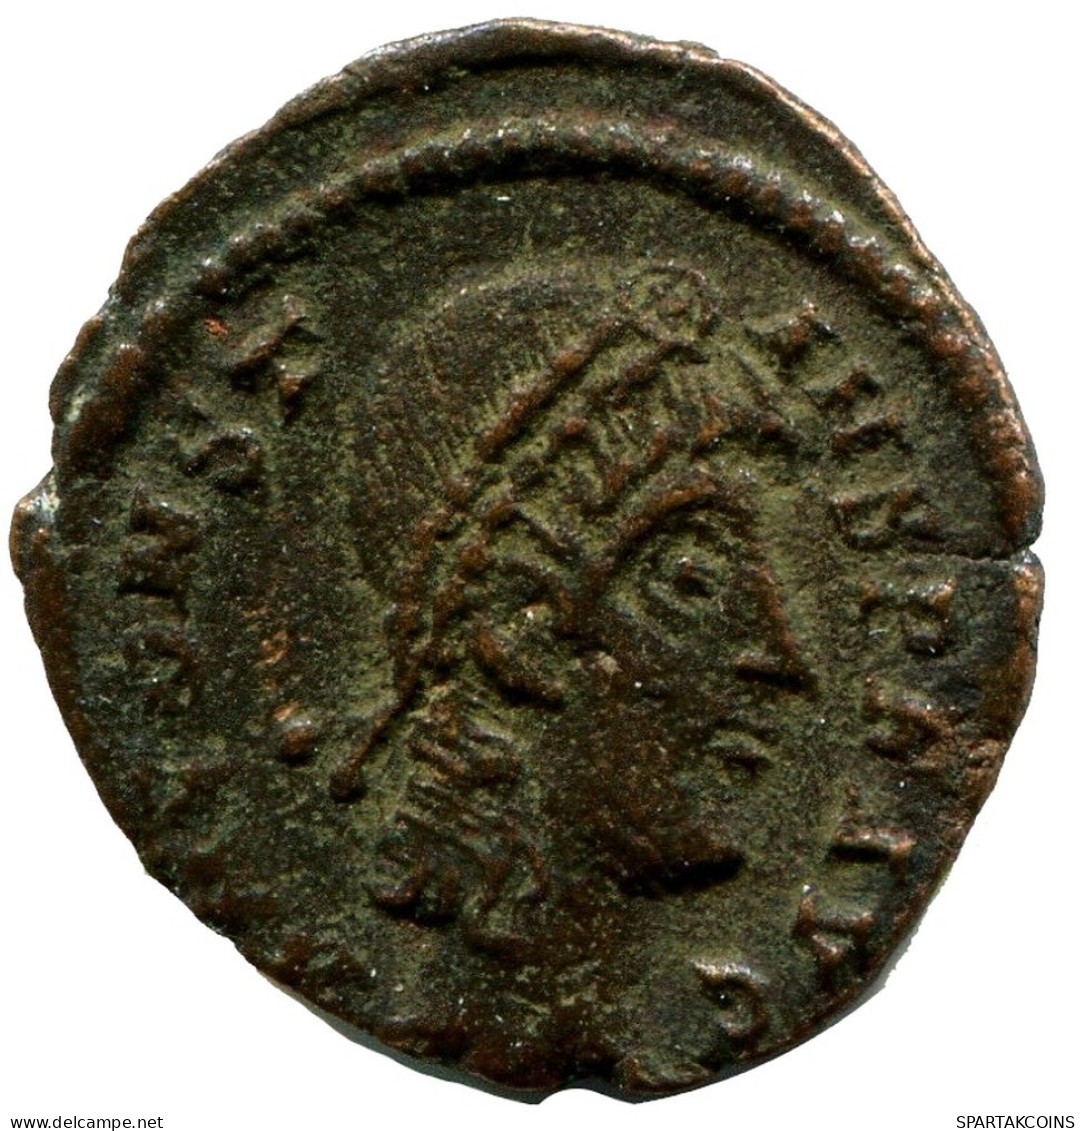 CONSTANS MINTED IN ALEKSANDRIA FROM THE ROYAL ONTARIO MUSEUM #ANC11465.14.U.A - The Christian Empire (307 AD To 363 AD)